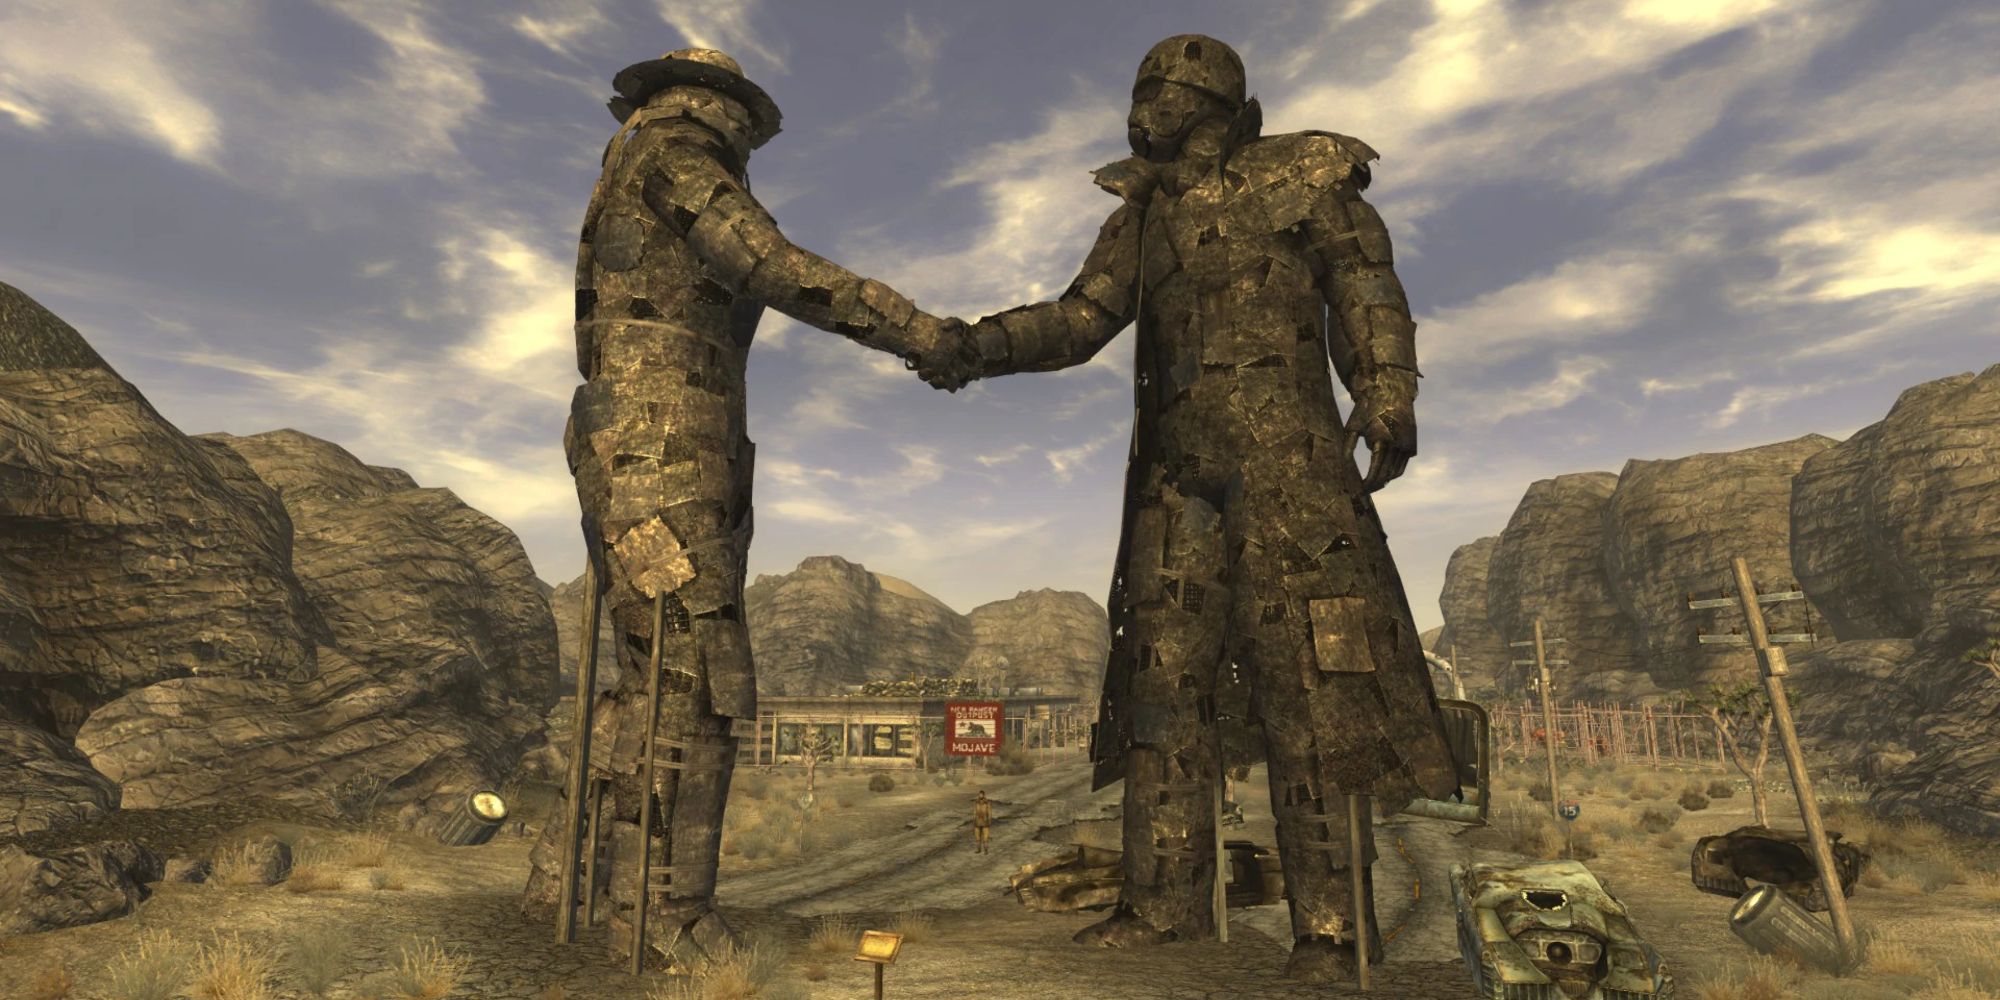 NCR statues.